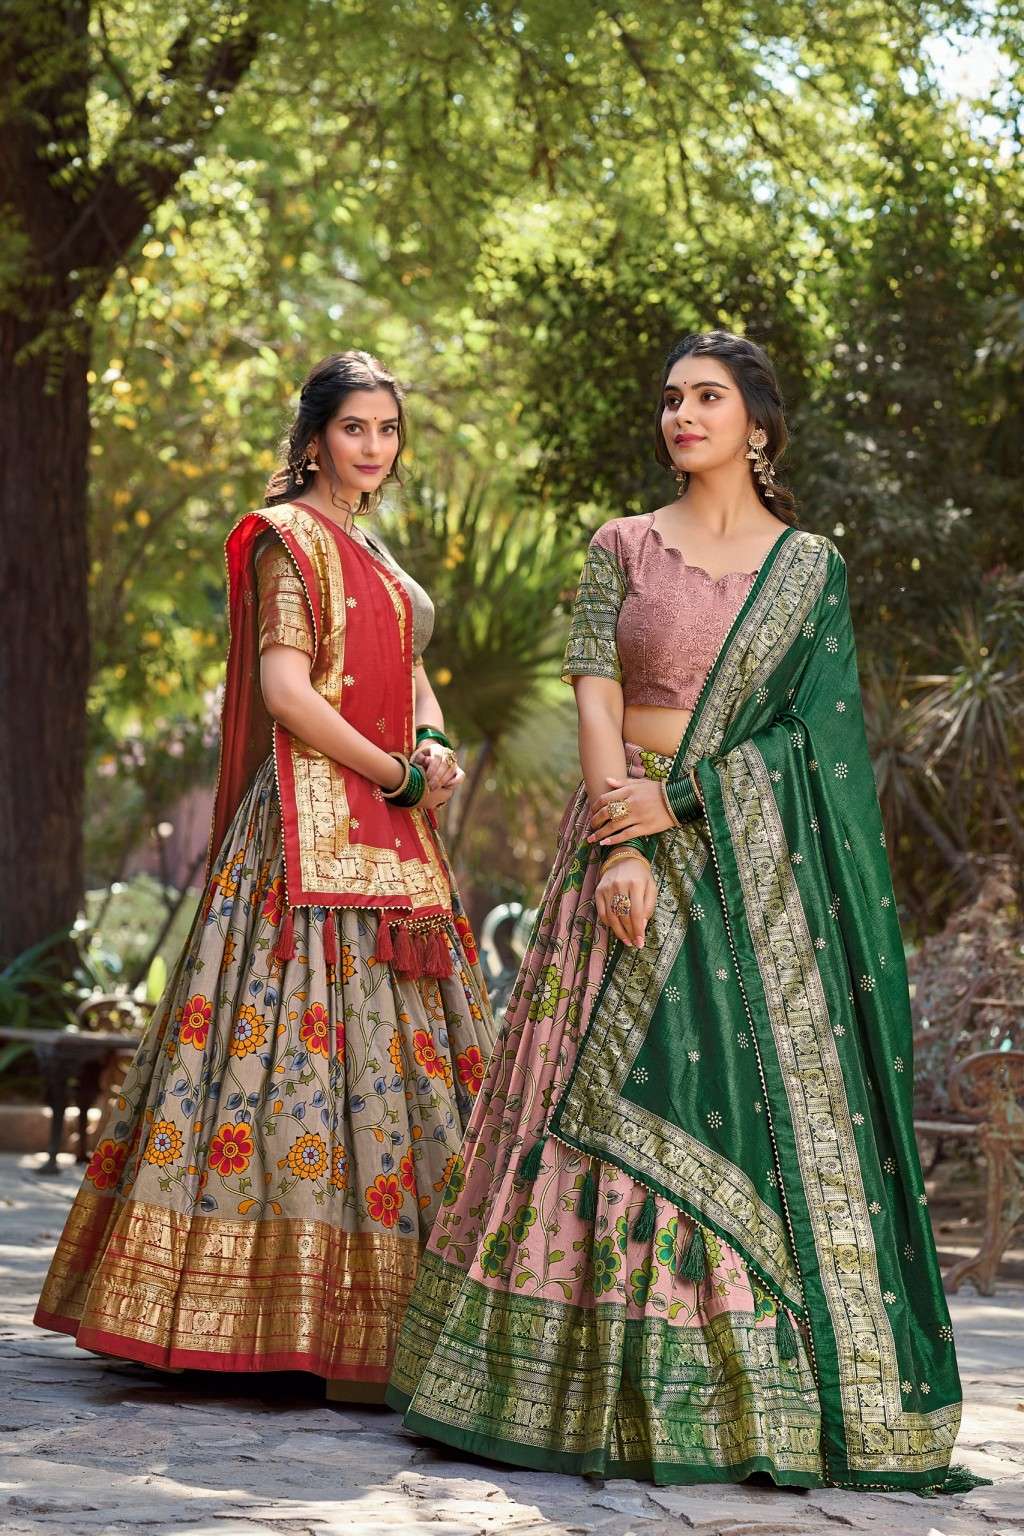 tussar silk lehenga choli collection with awesome designs and prints at wholesale rates